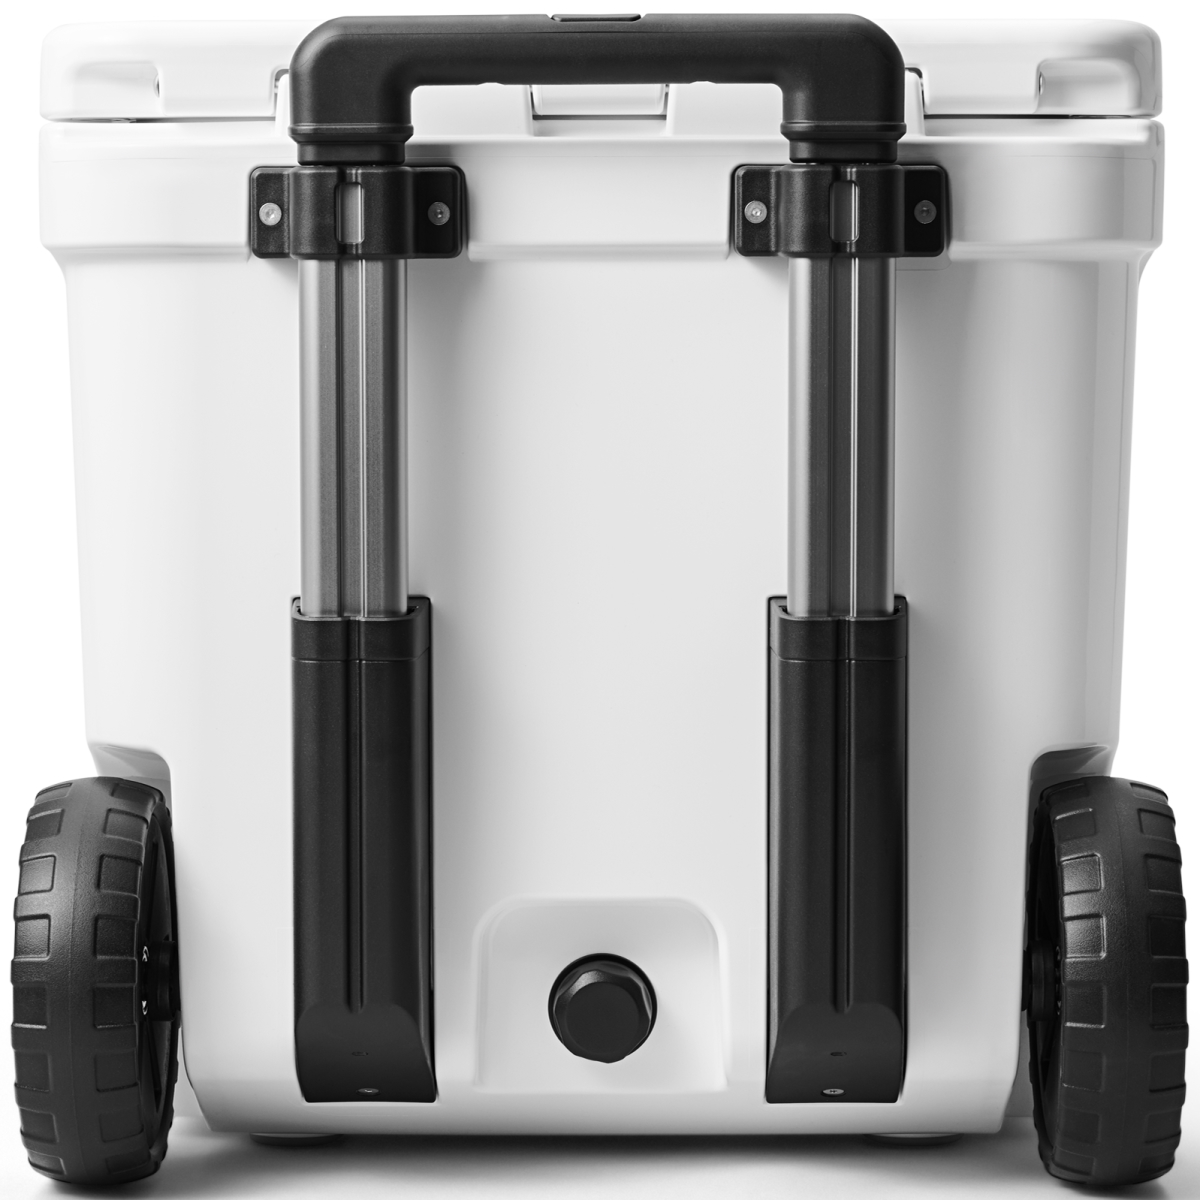 Yeti Roadie 48 - Rolling Wheeled Cooler – Wind Rose North Ltd. Outfitters